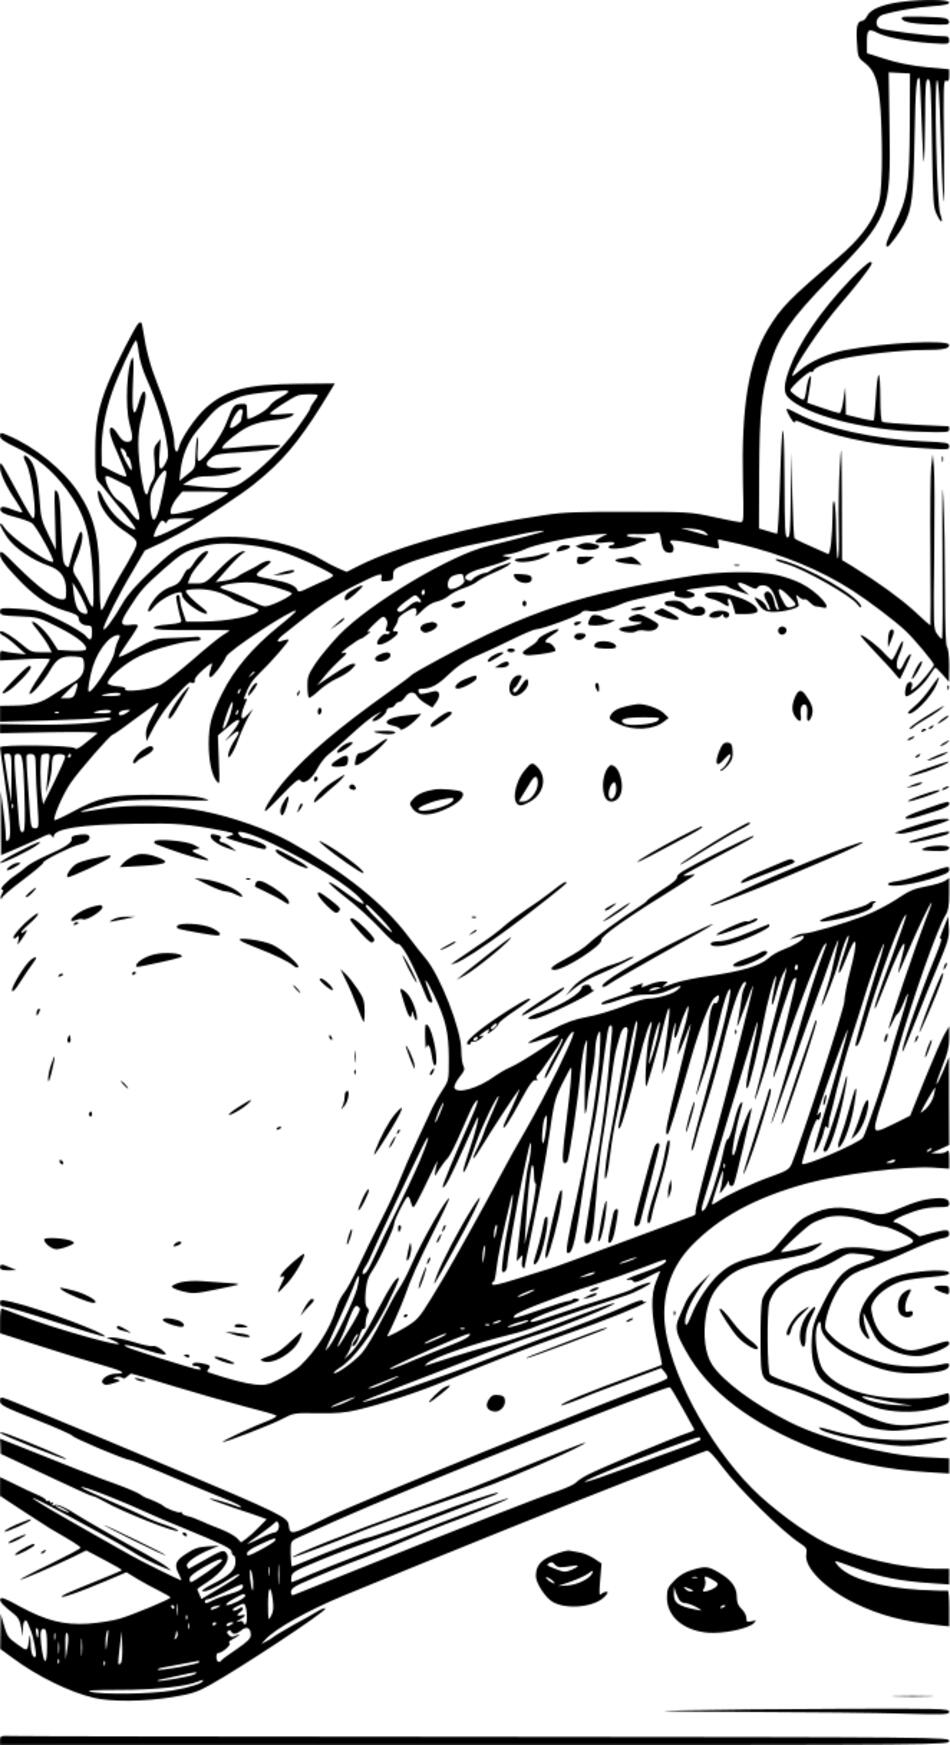 Coloring book The aroma of fresh bread (Vertical)